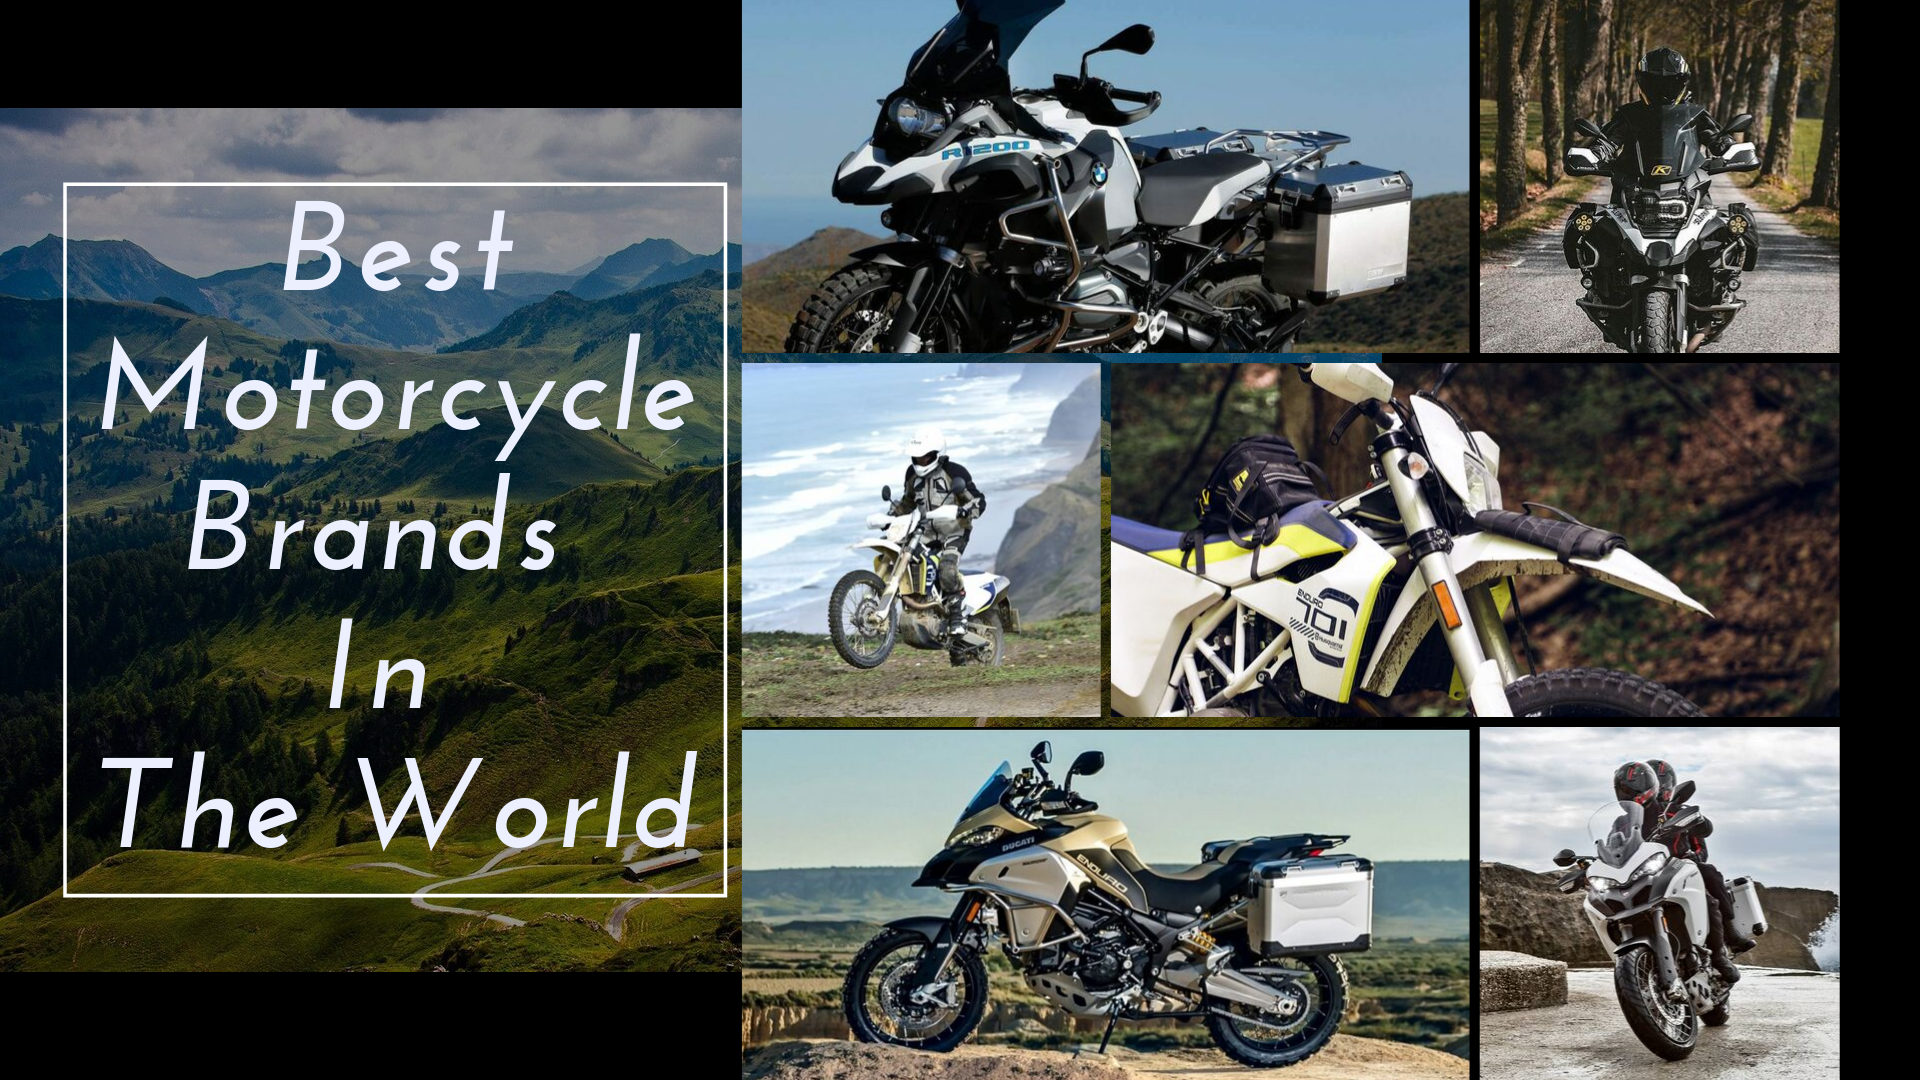 largest motorcycle manufacturer